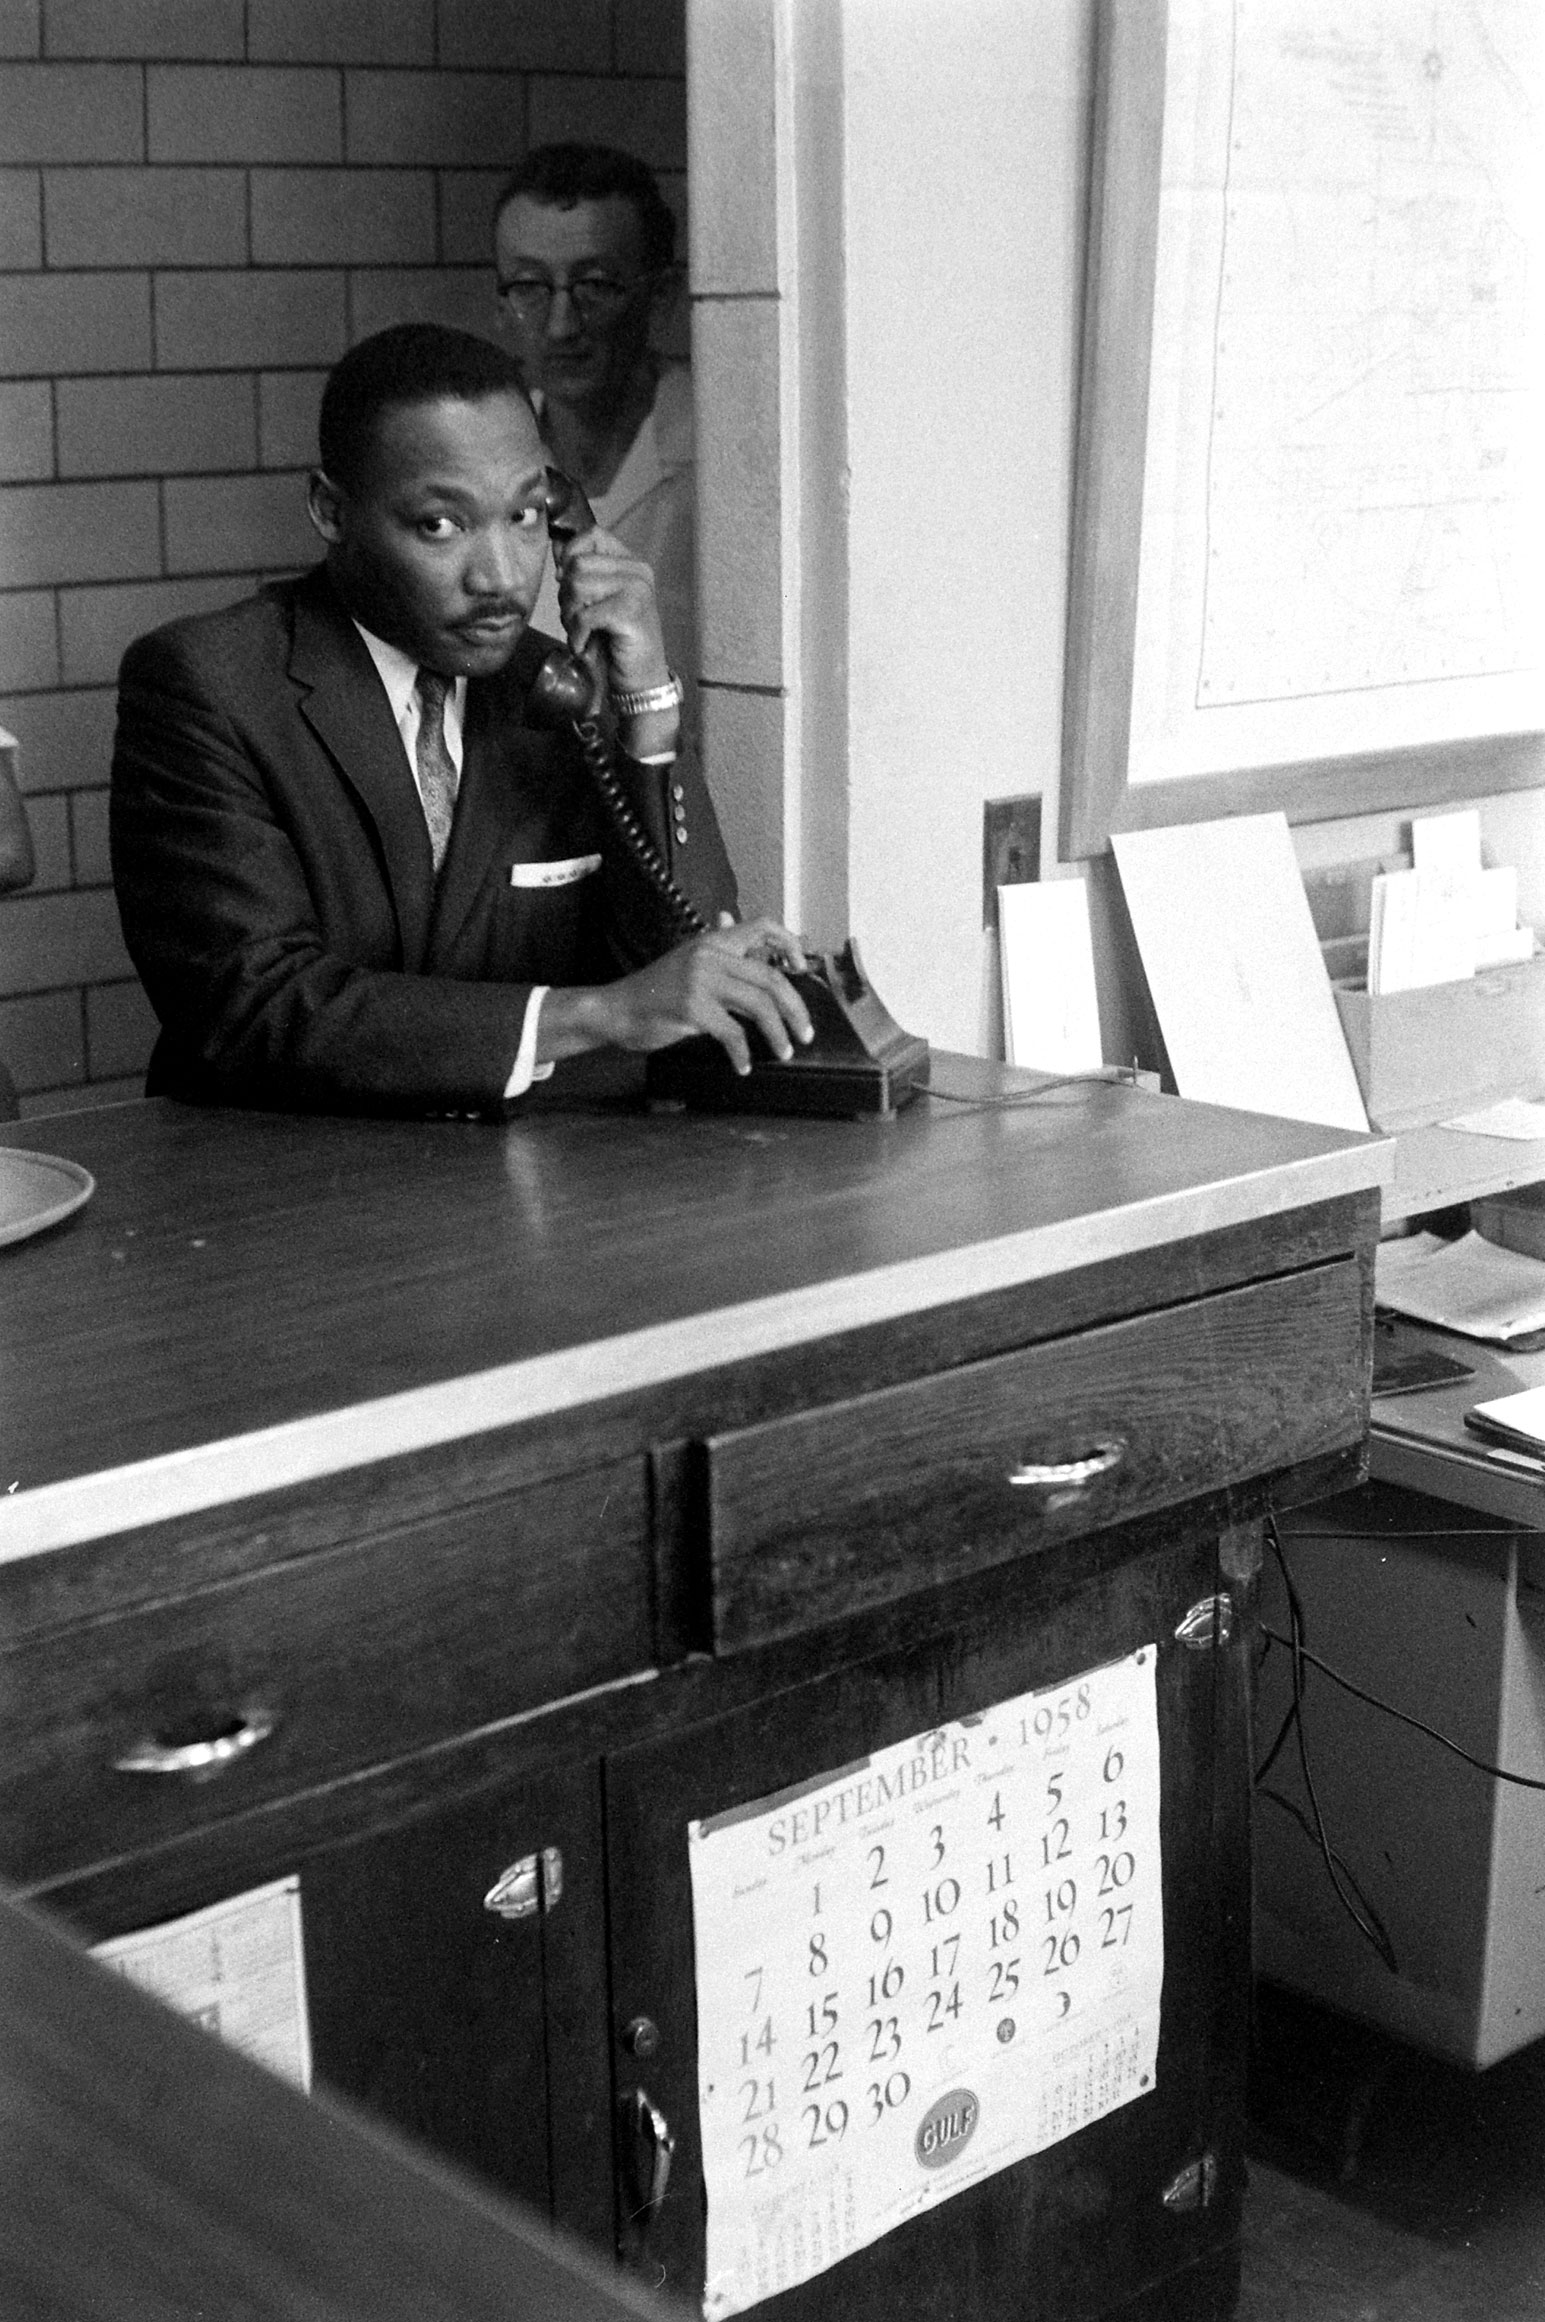 Martin Luther King on the phone, 1958.